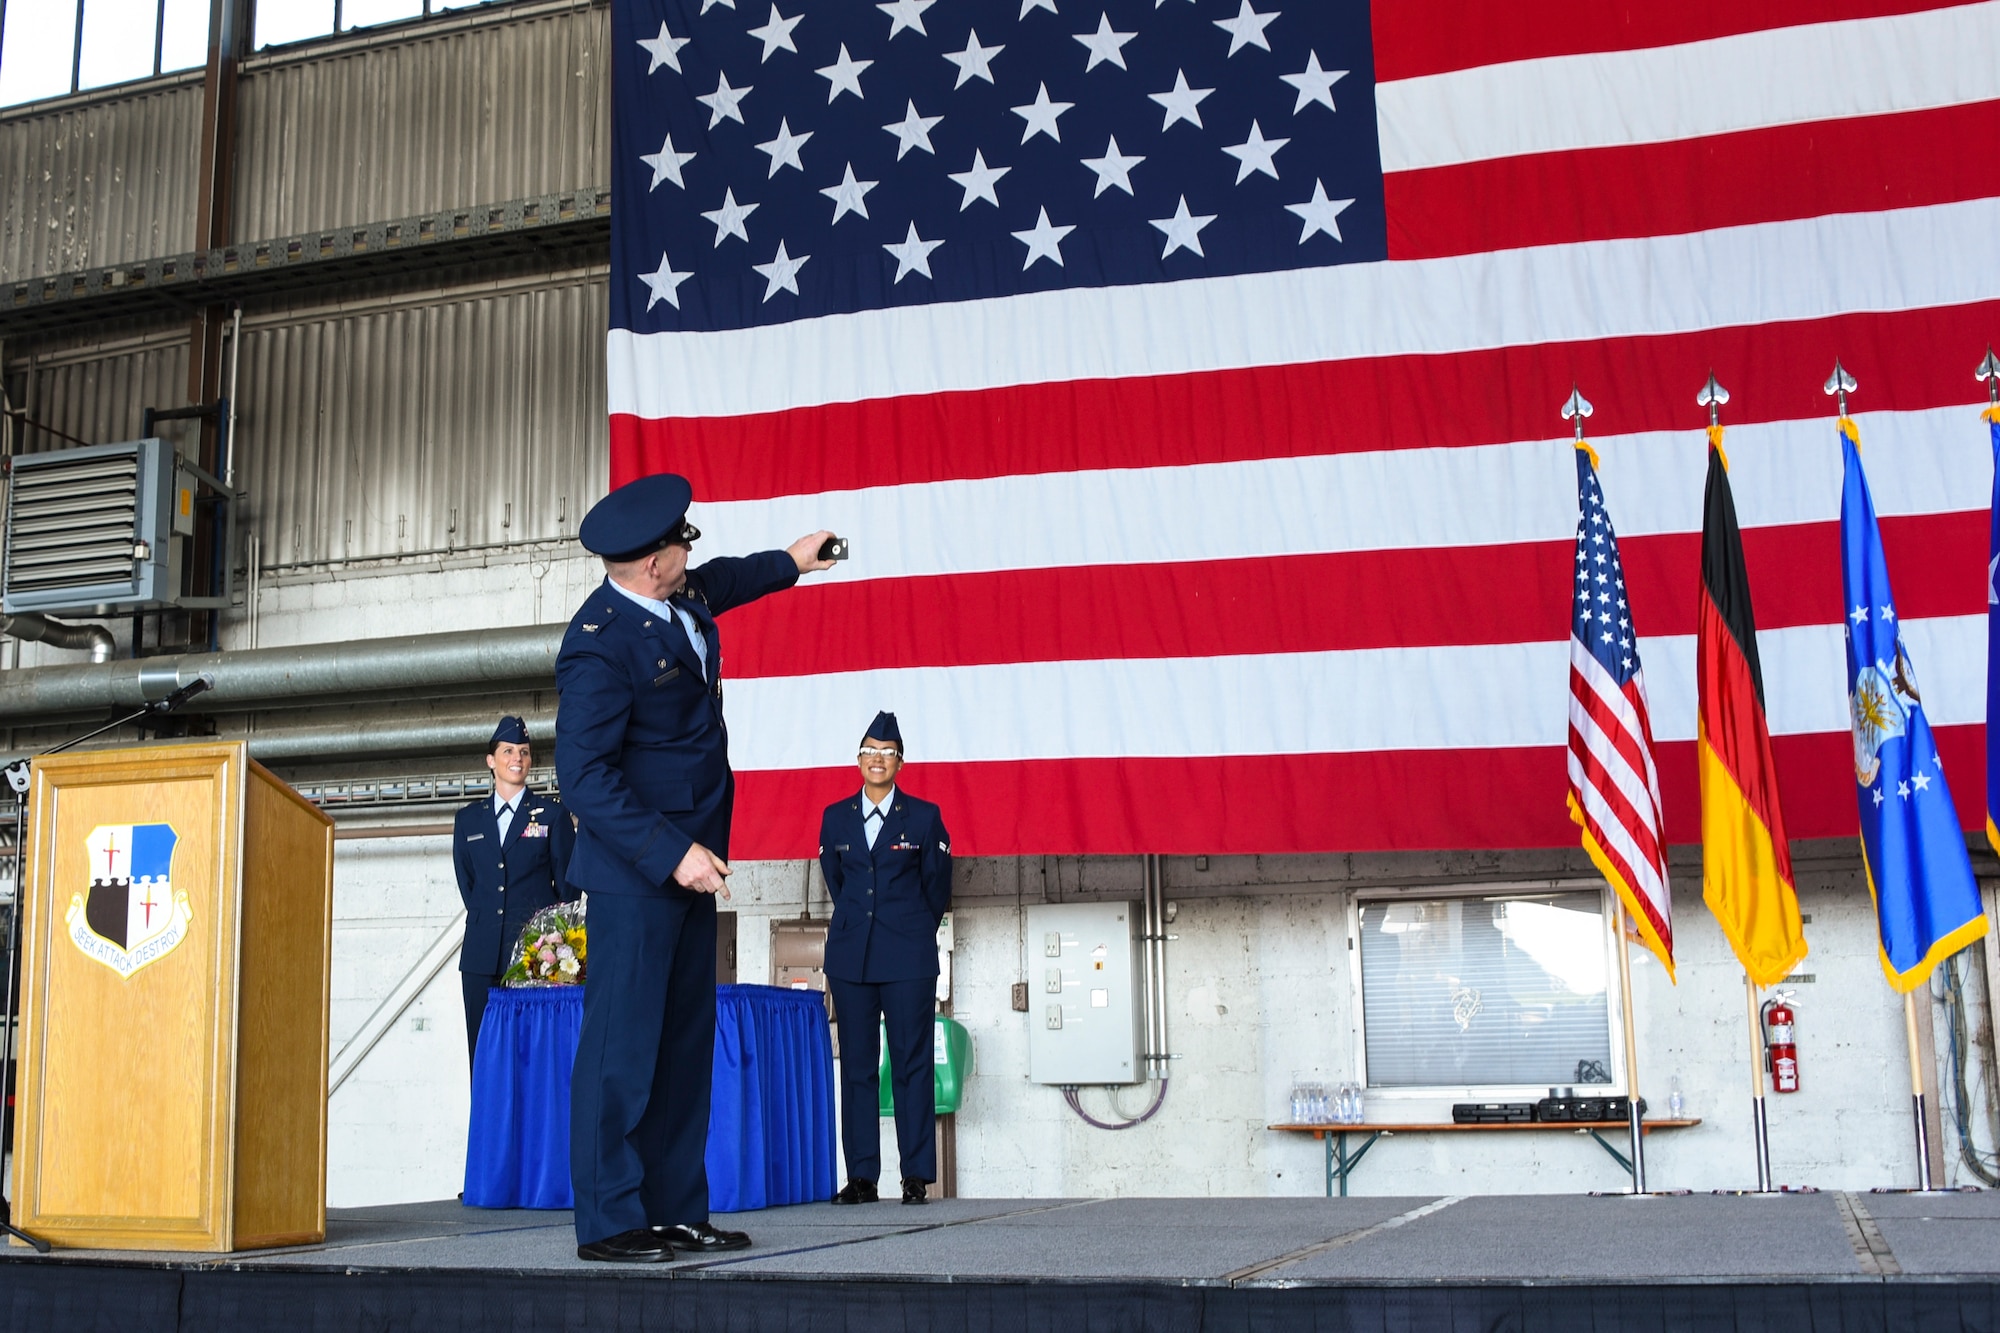 U.S. Air Force Col. Joseph McFall, outgoing 52nd Fighter Wing commander, takes a selfie before relinquishing command to Col. Jason Bailey, incoming commander, during the wing change of command ceremony in Hangar 1 at Spangdahlem Air Base, Germany, Aug. 29, 2017.  Nearly 400 people attended the event to witness the traditional change of command ceremony as Bailey accepted responsibility as the wing commander. (U.S. Air Force photo b Senior Airman Dawn M. Weber)